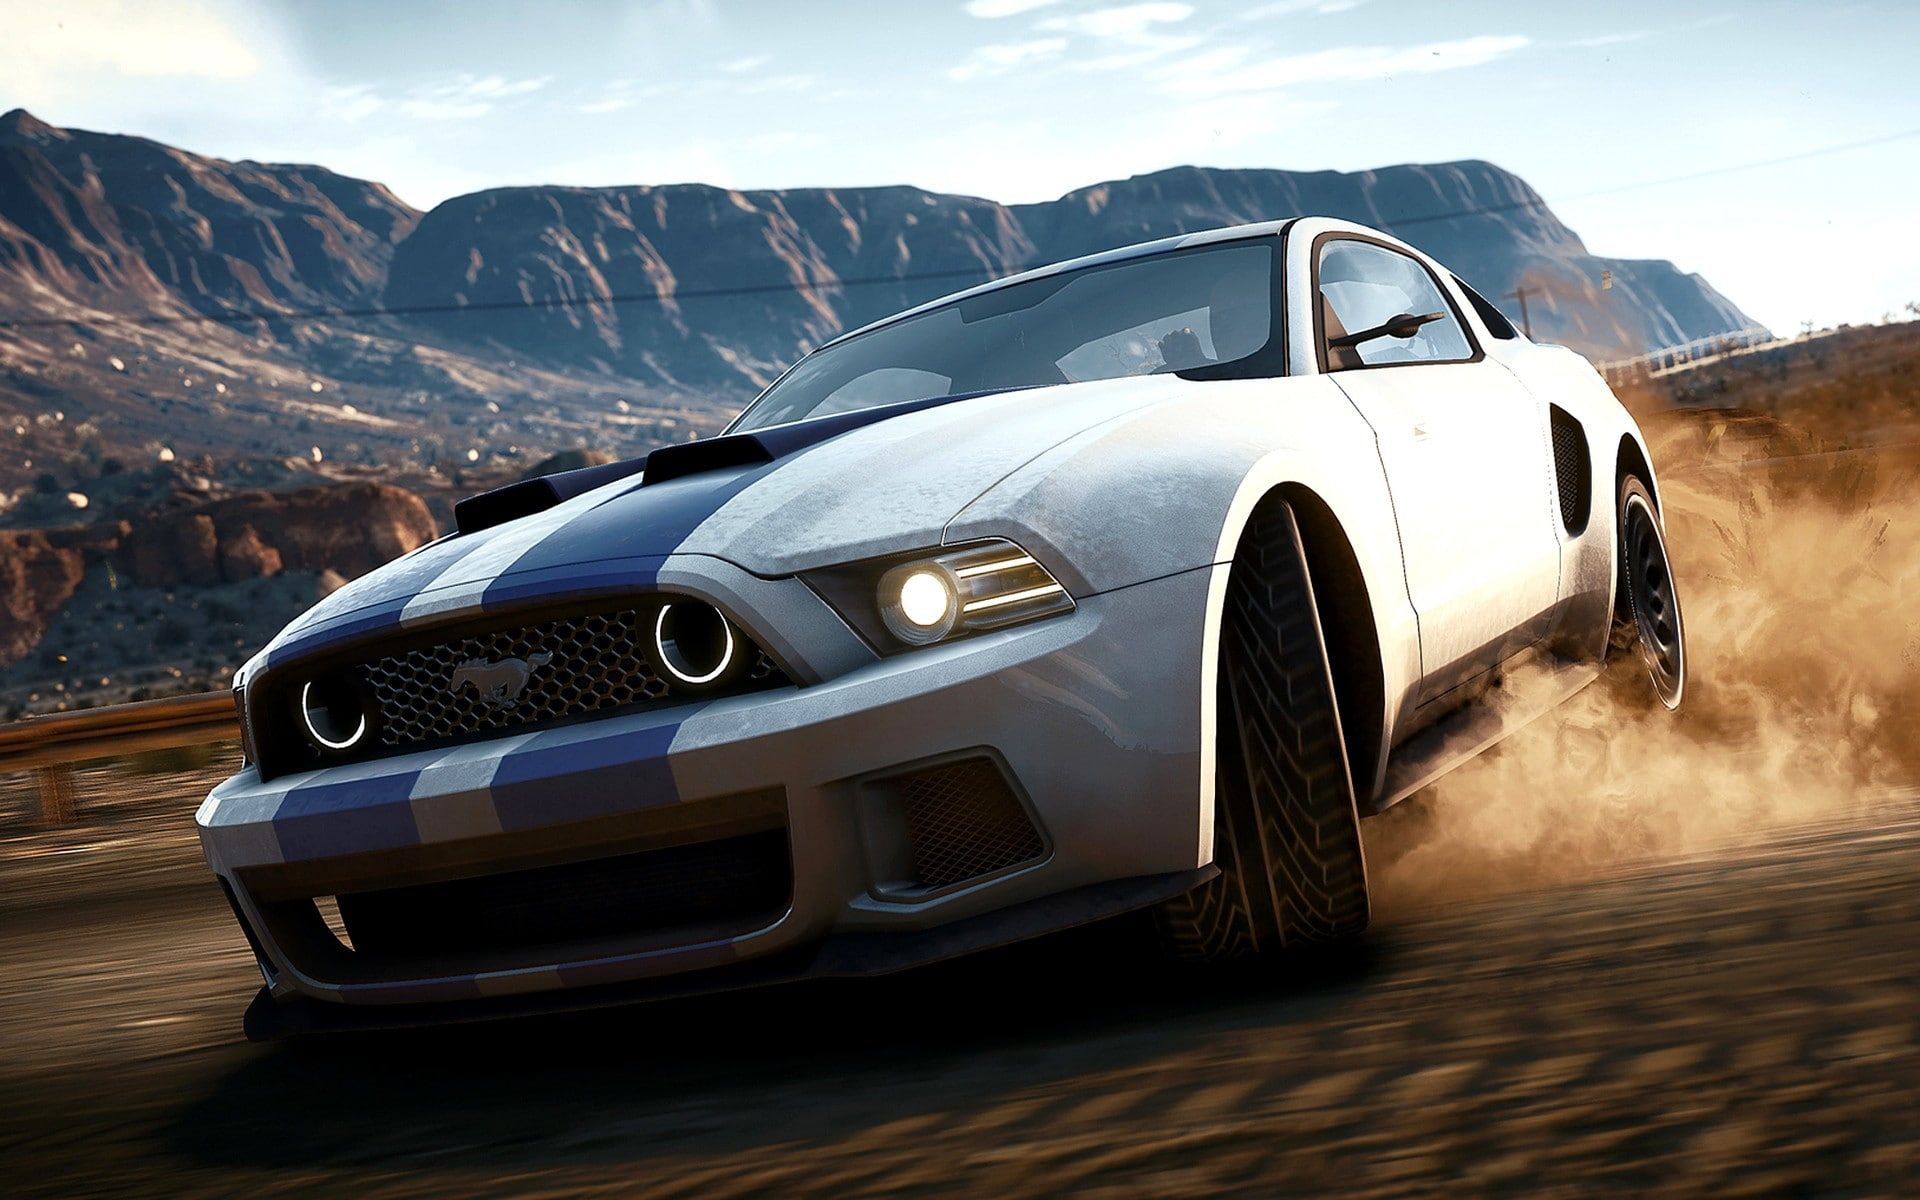 Game Need For Speed Rivals #game #NFS Need for Speed #Rivals #Ford #Mustang #Shelby #speed #Shift #Drift #dust #car #HD Be. Mustang, Need for speed rivals, Shelby